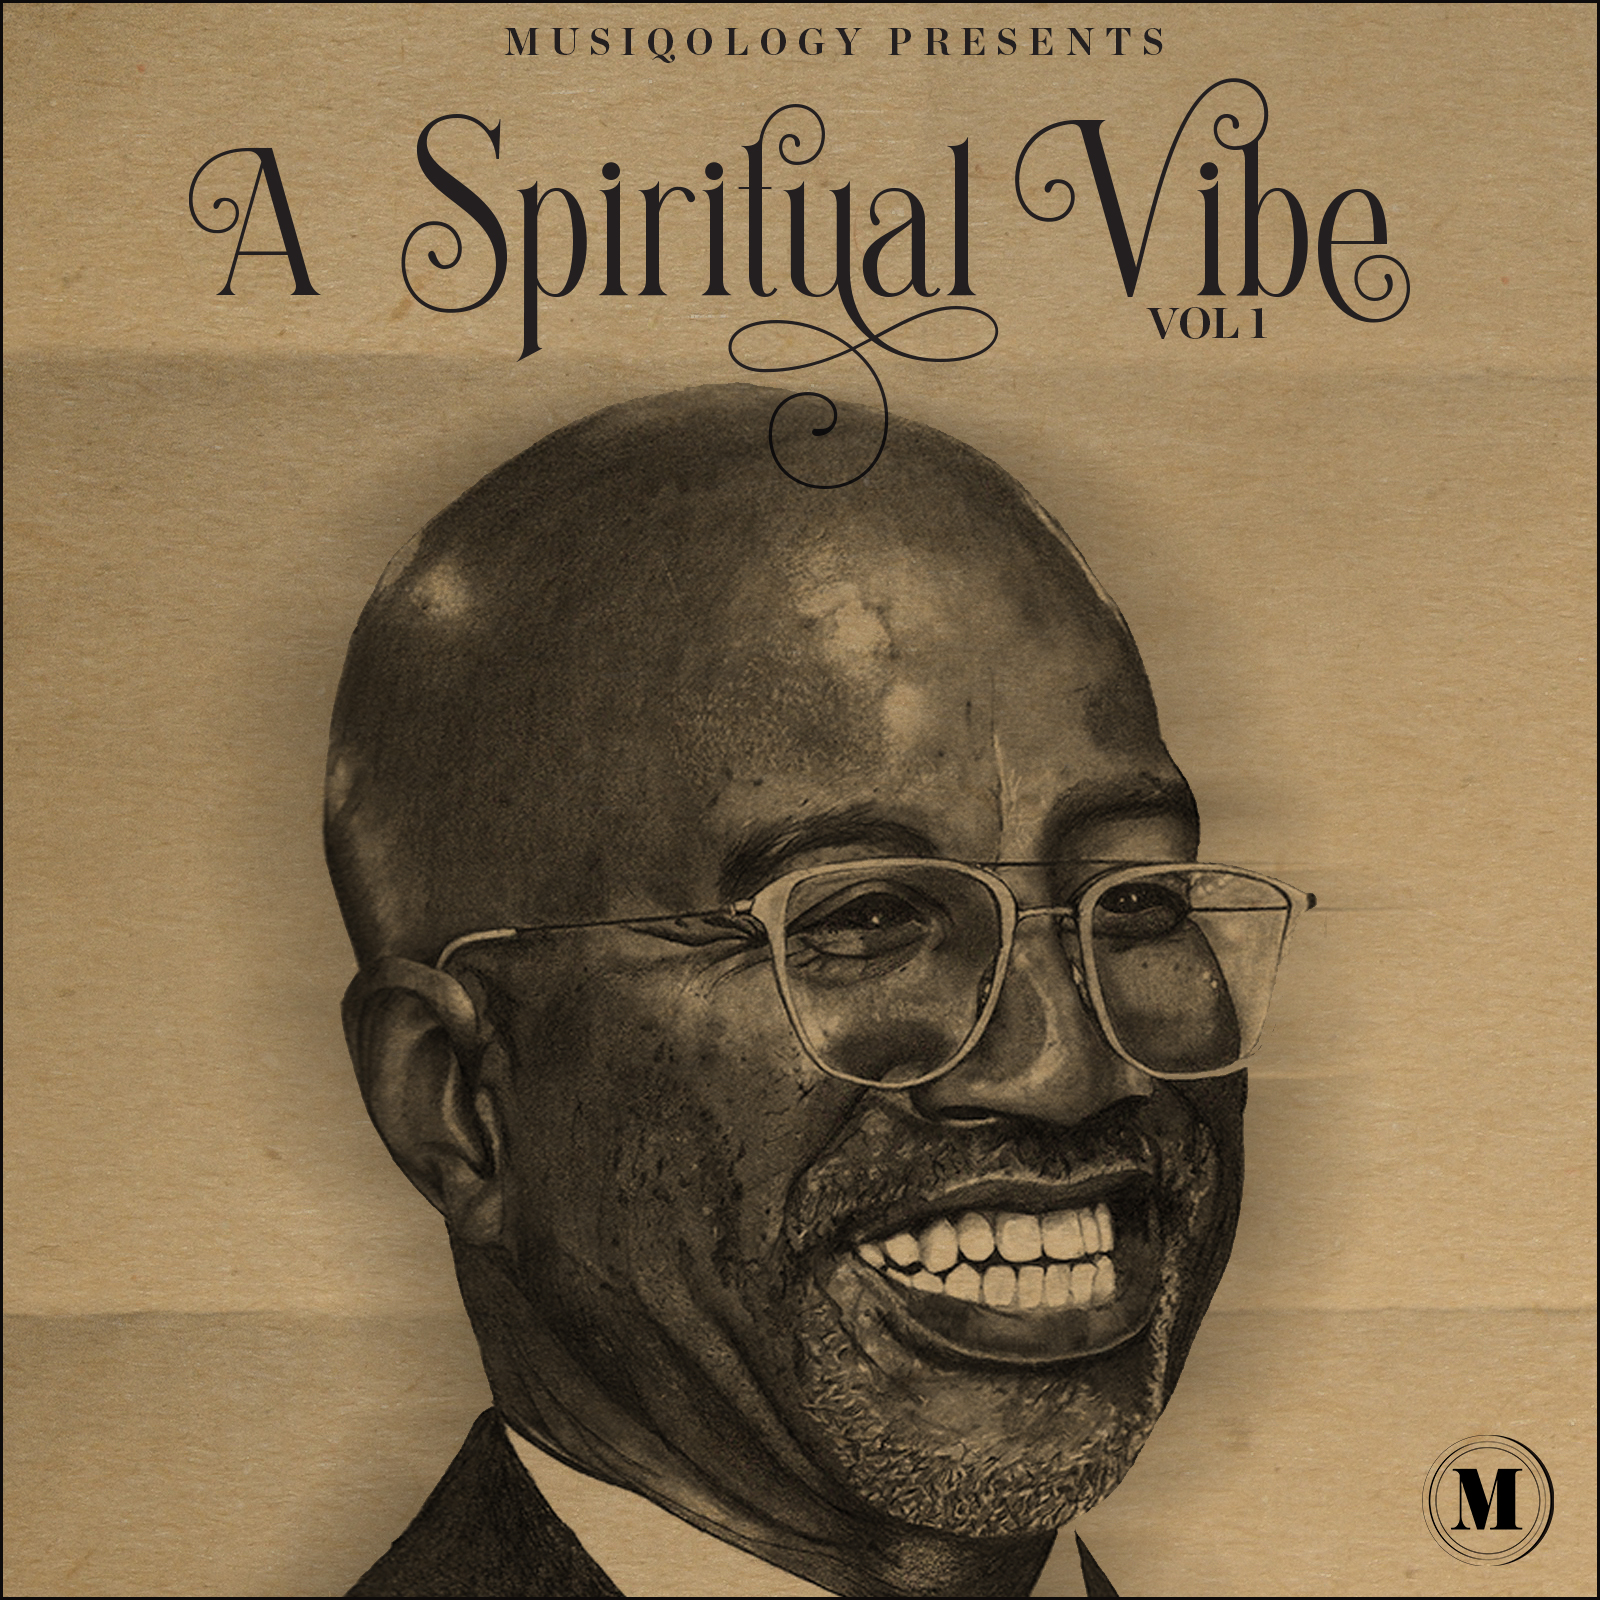 Illustration of professor and musician Guy Ramsey smiling on album cover for A Spiritual Vibe 